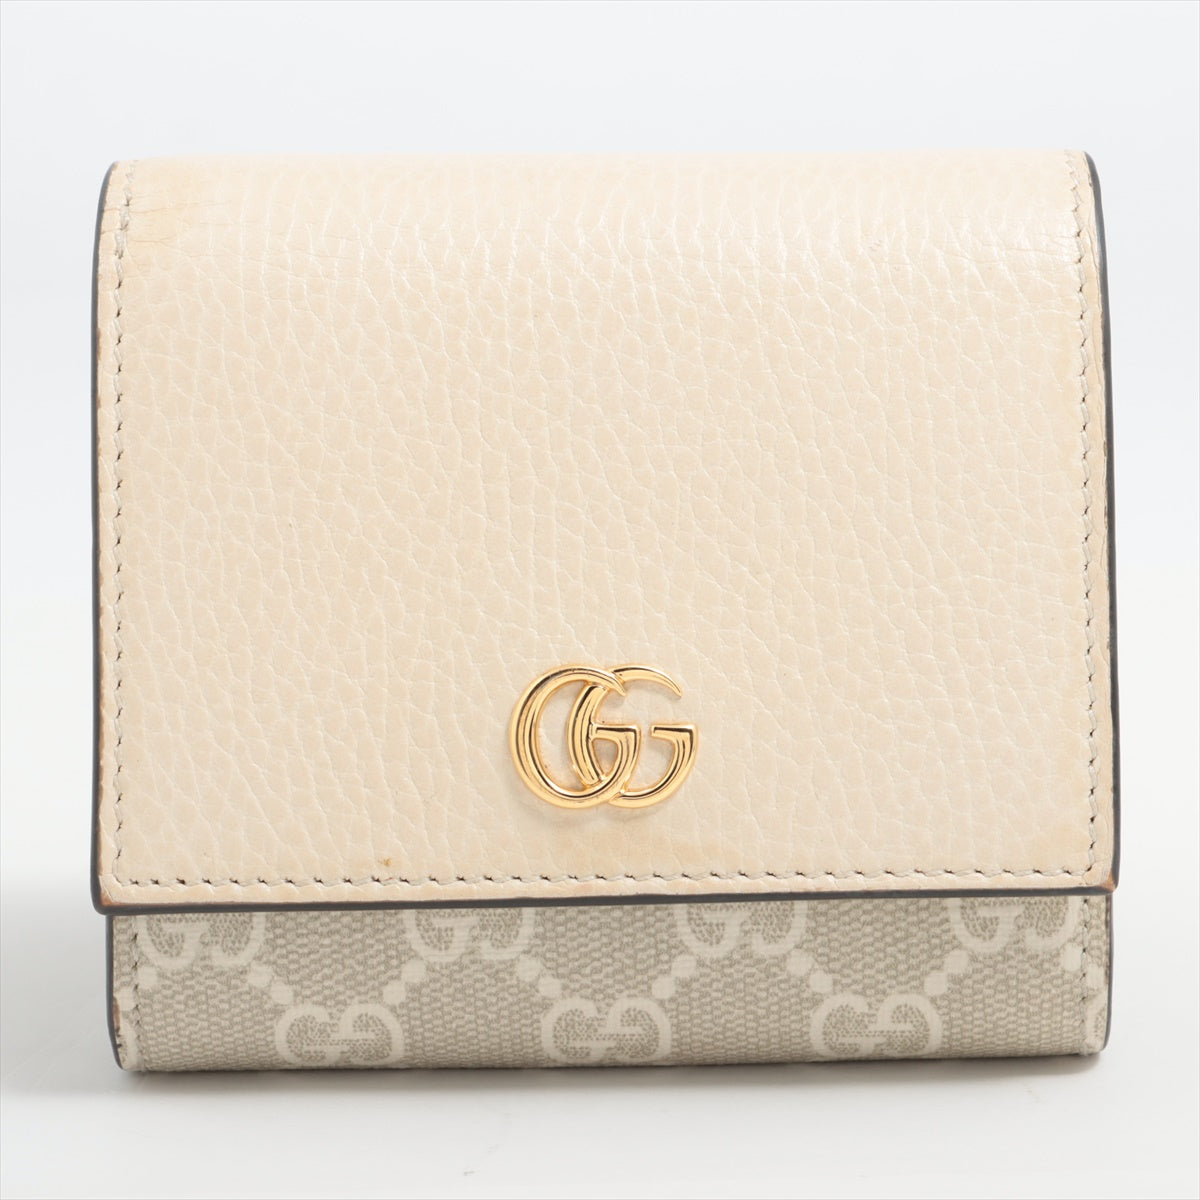 Gucci GG Marmont 598587 PVC & leather Compact Wallet Ivory x beige